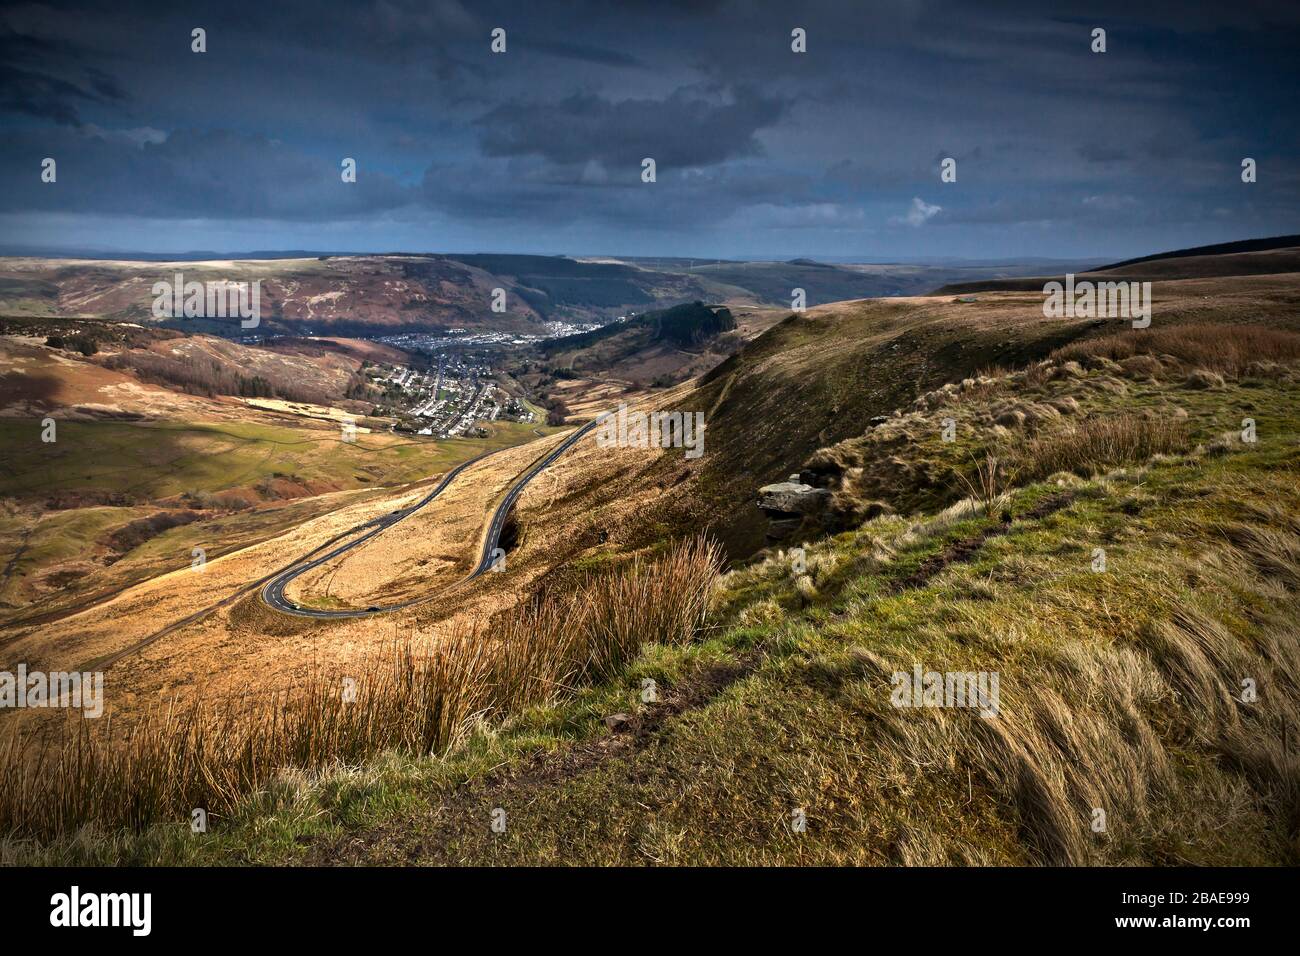 View towards the Rhondda Valley with Cwmparc and Treorchy in the distance and the A4061 Bwlch Mountain road in middle distance, Wales, UK Stock Photo